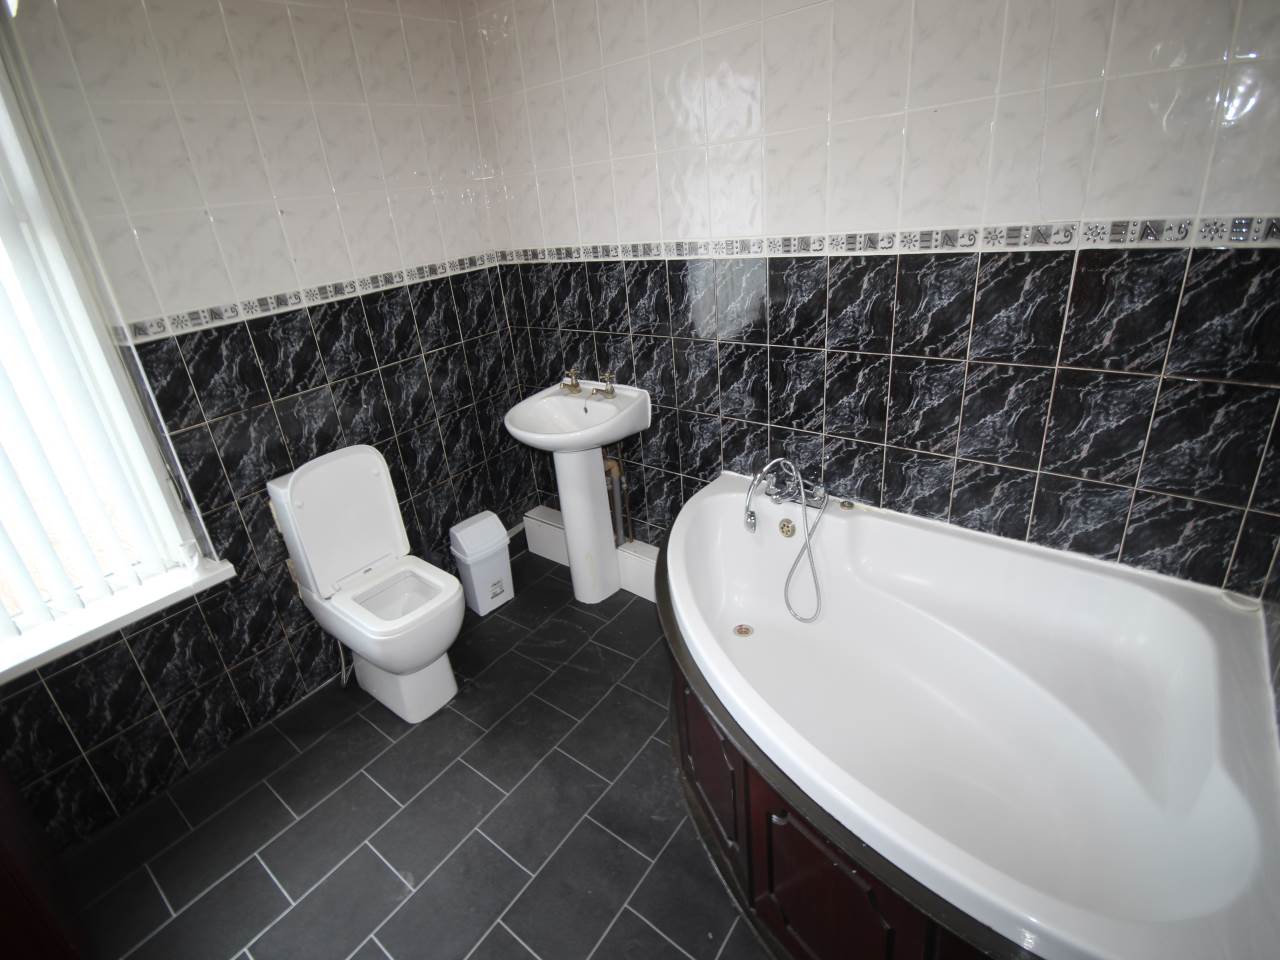 1 bed house / flat share to rent in Little Horton Lane  - Property Image 5